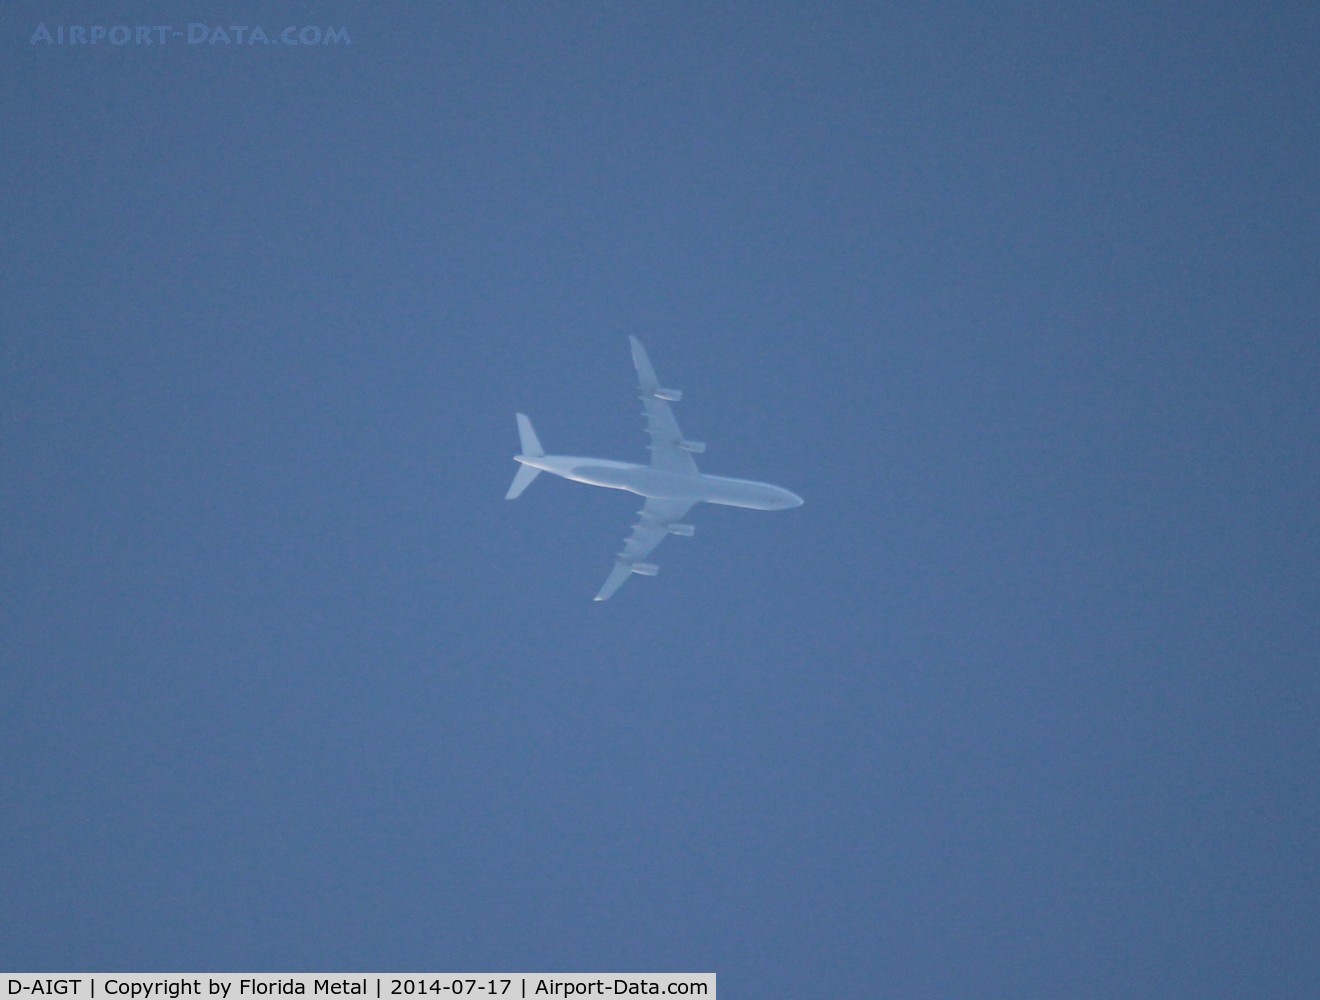 D-AIGT, 1999 Airbus A340-313 C/N 304, Lufthansa A340-300 flying 32,000 ft from ORD - DUS over Livonia Michigan